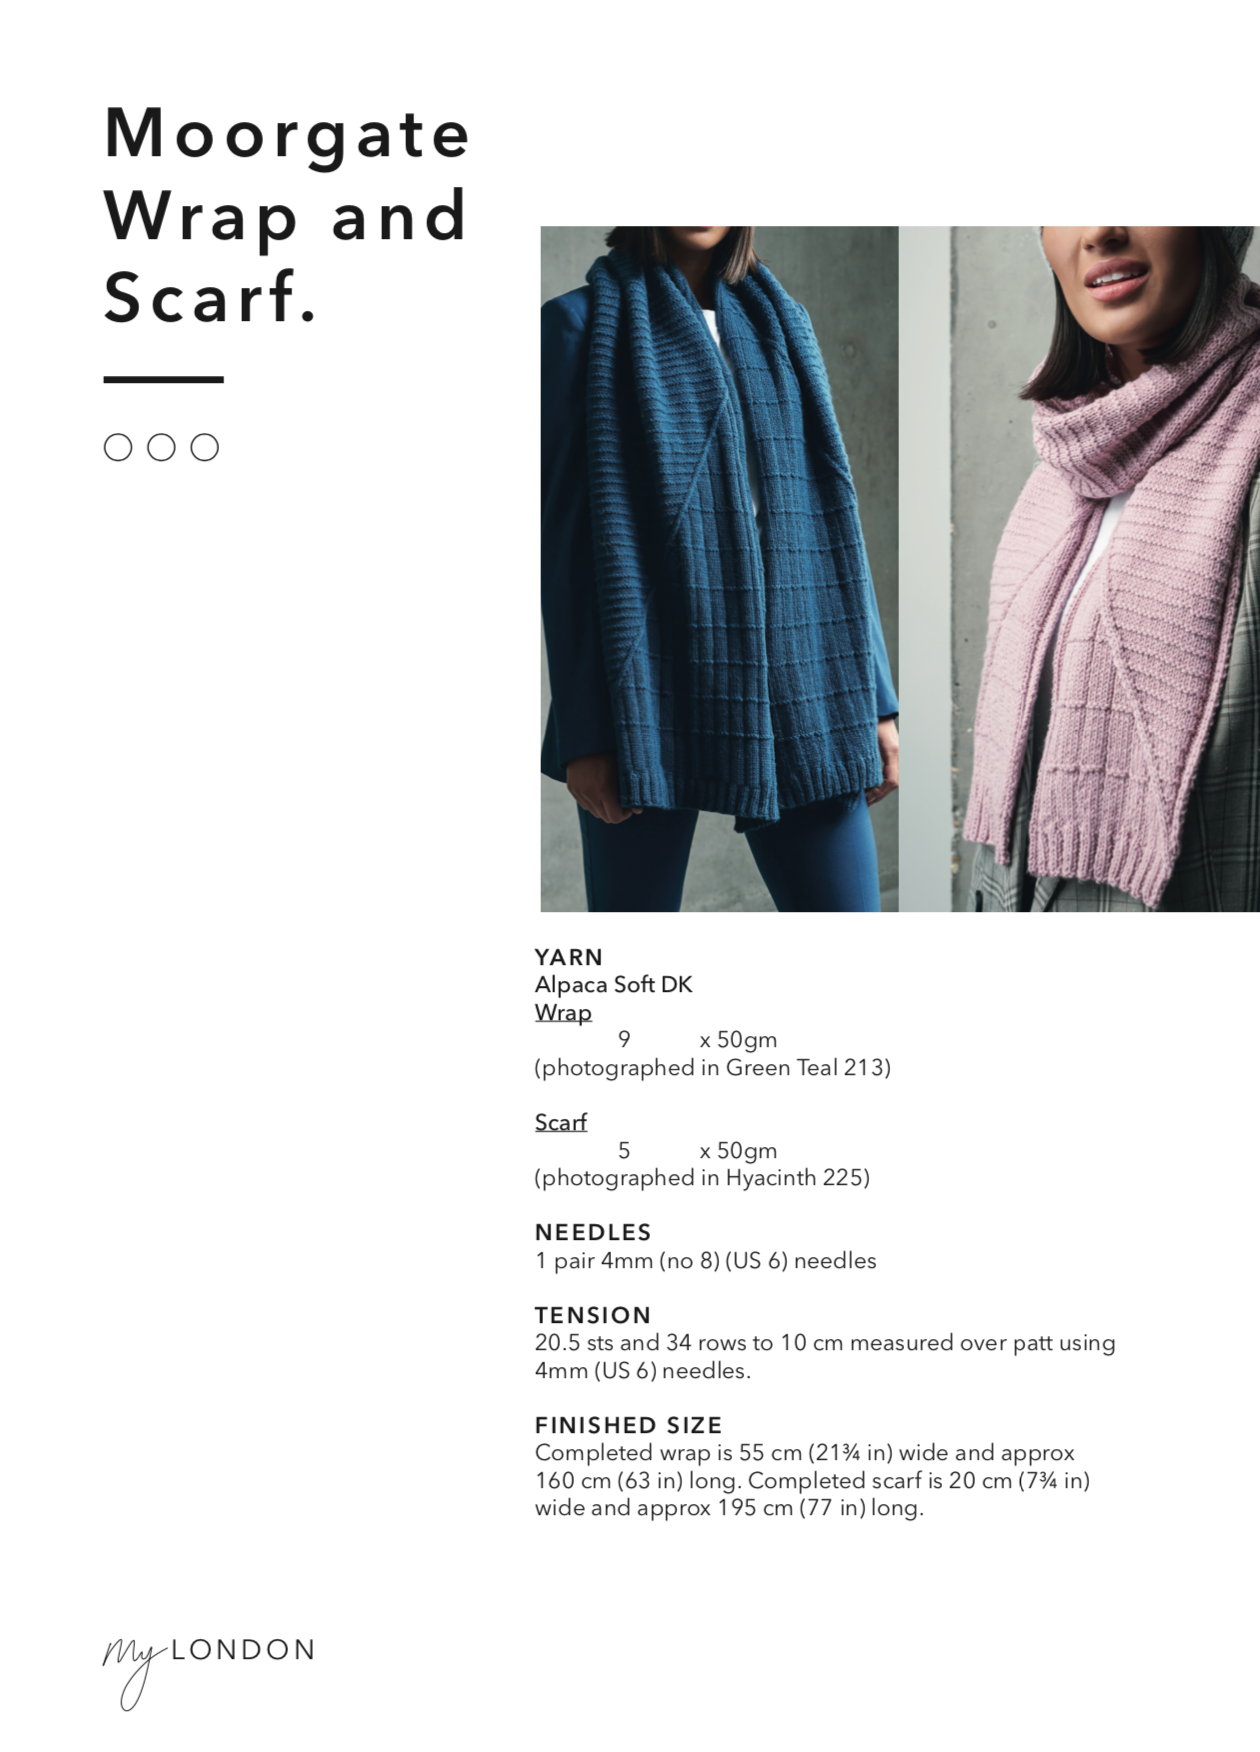 Moorgate wrap and scarf. A dusty pink line and square pattern scarf, approximately 20cm wide x 195cm long. A green teal line and square pattern wrap, approximately 55cm wide x 160cm long.